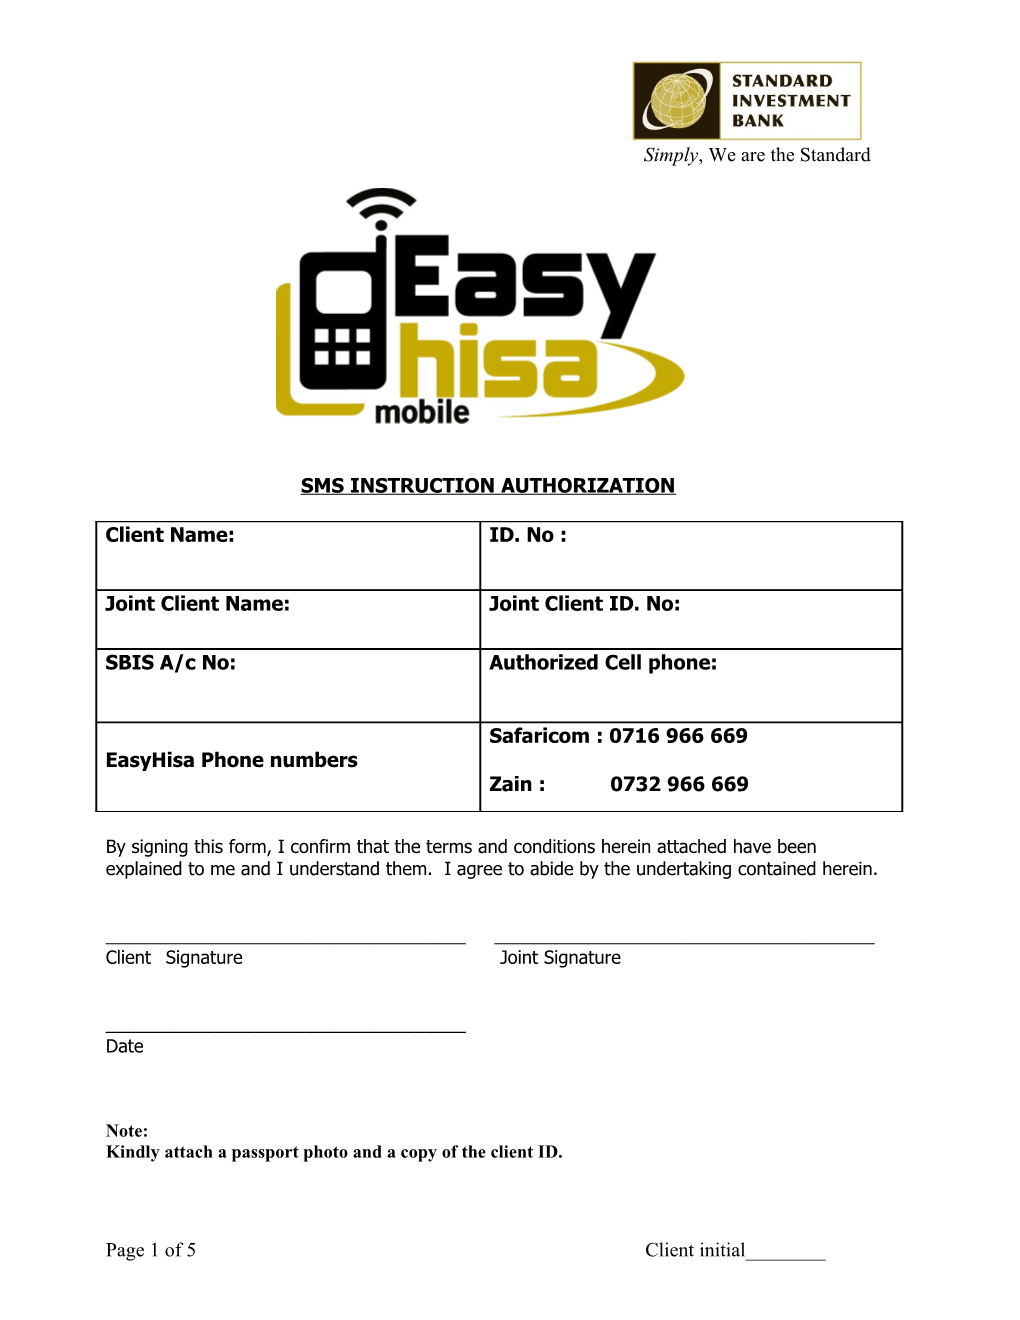 Letterhead Such As the One on Order Forms